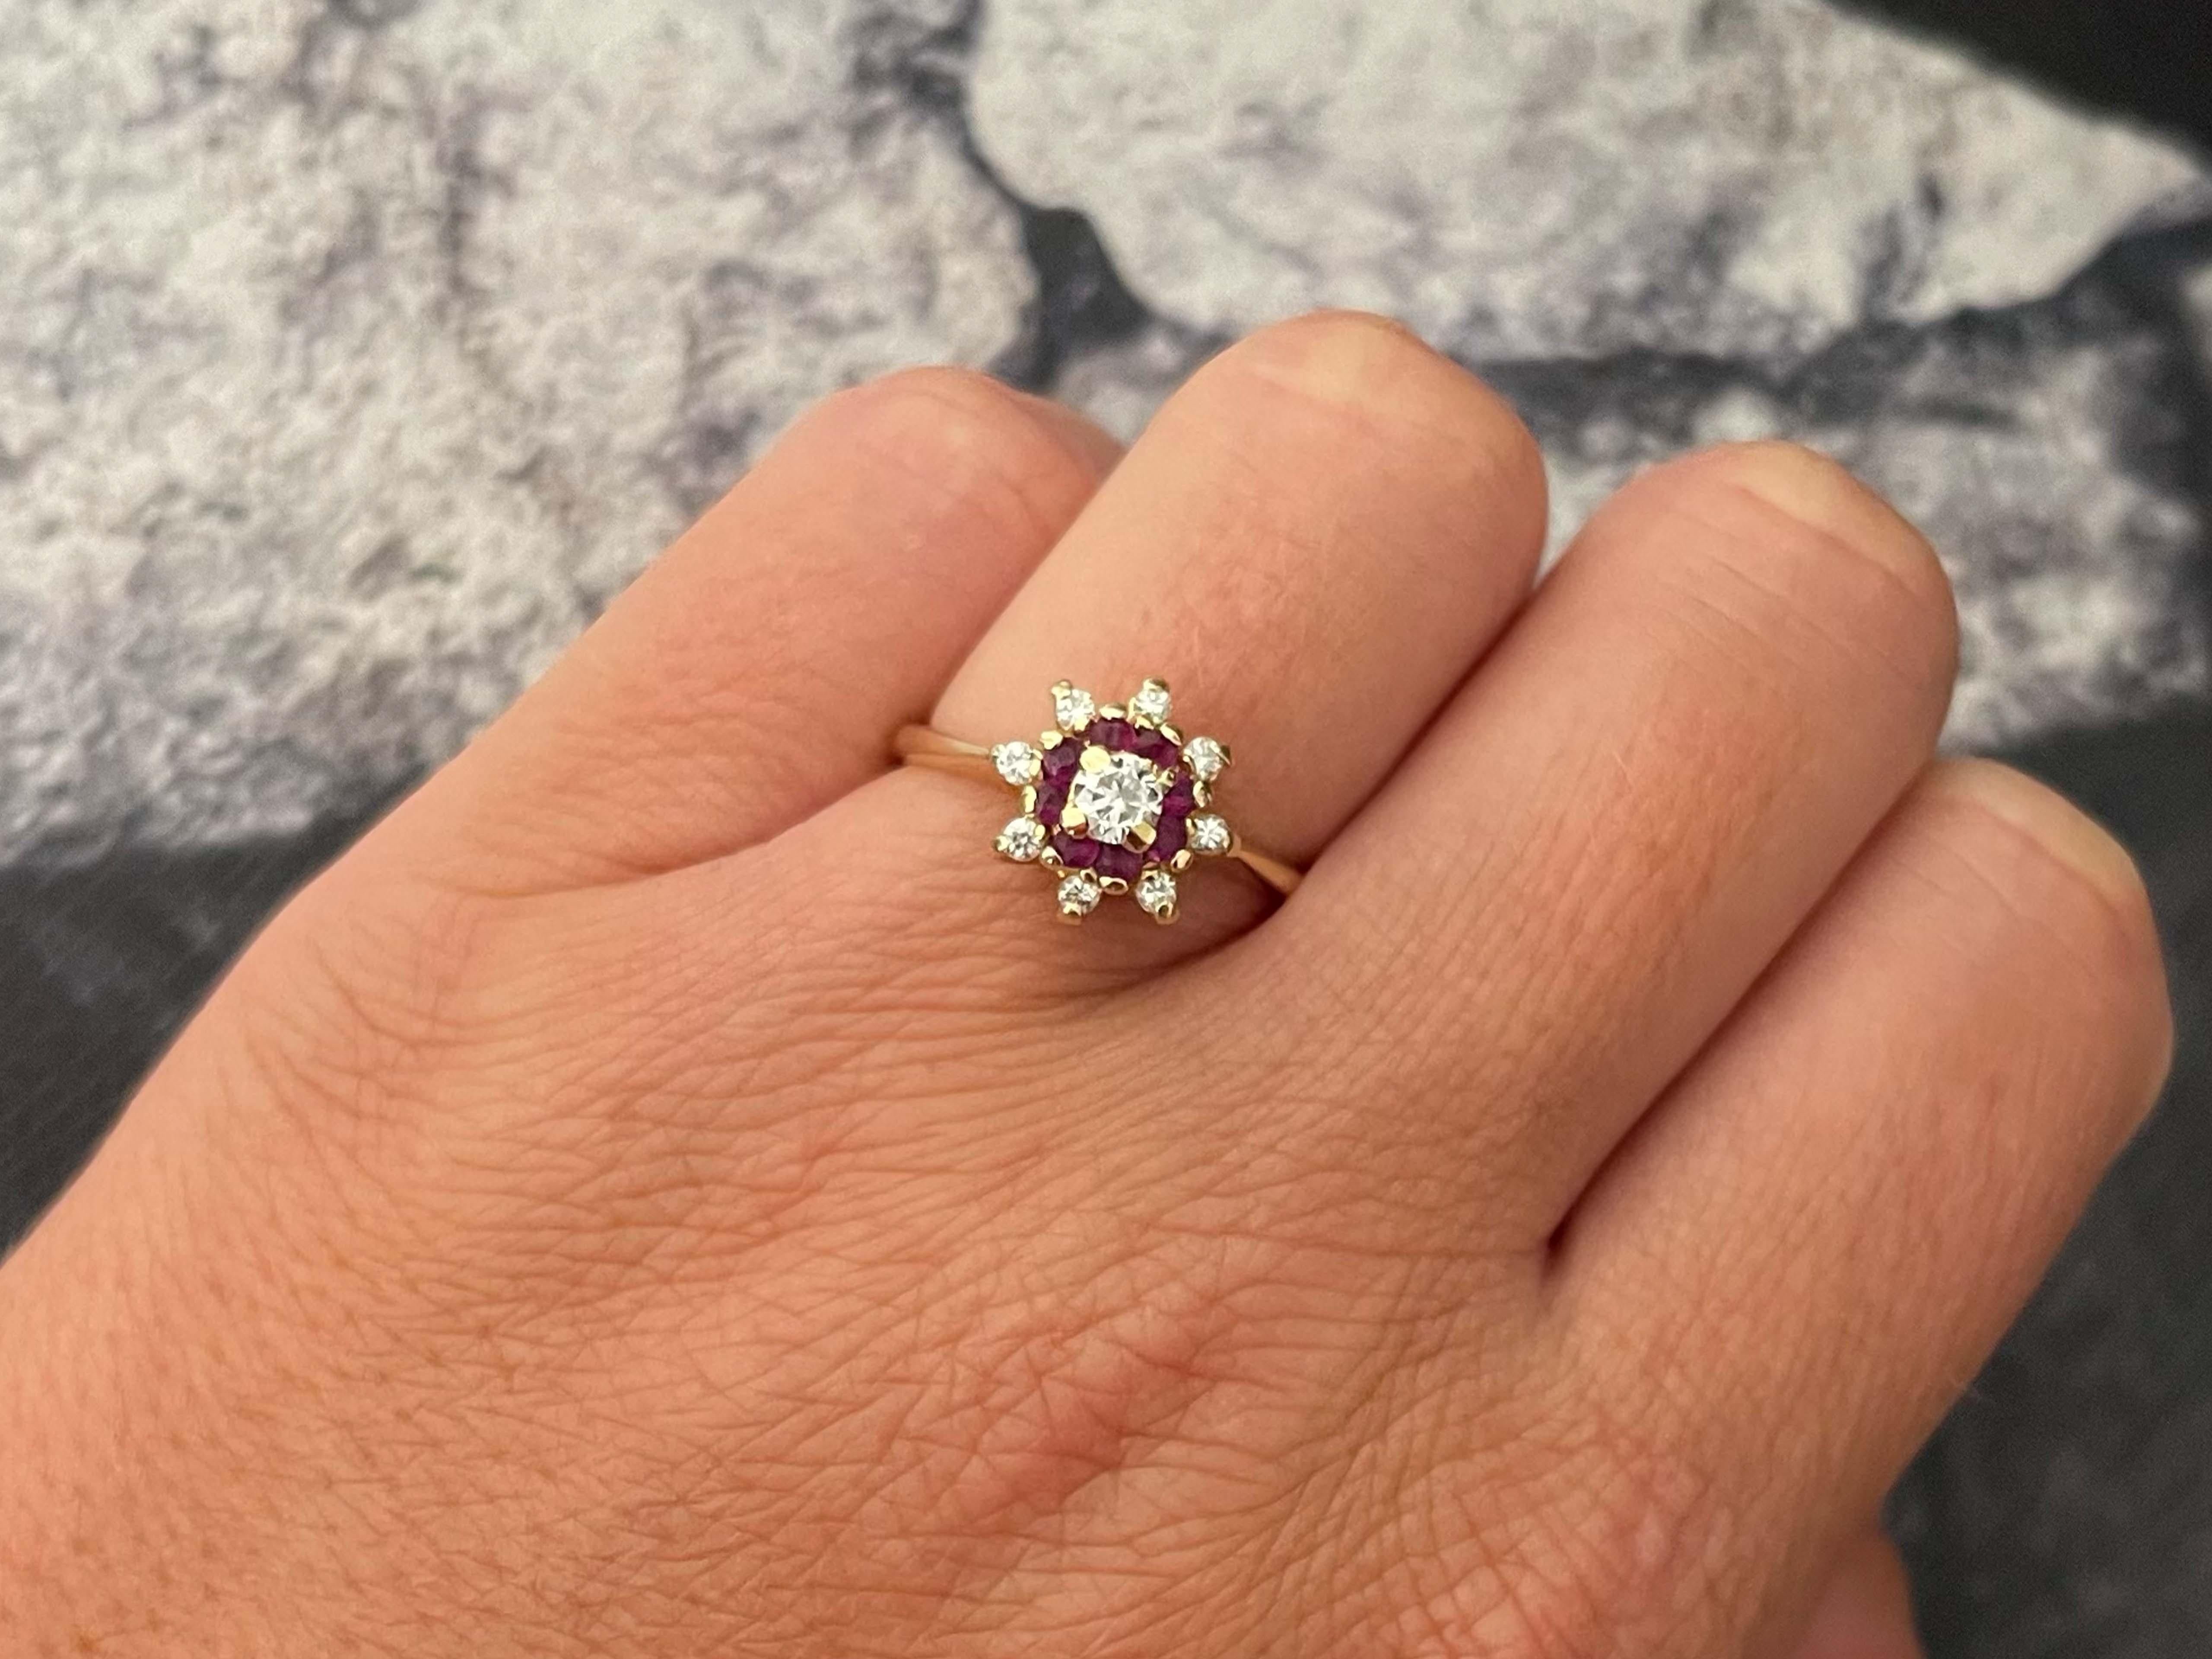 Item Specifications:

Metal: 14K Yellow Gold

Style: Statement Ring

Ring Size: 7.5 (resizing available for a fee)

Total Weight: 3.5 Grams

Gemstone Specifications:

Gemstones: 8 red rubies

Ruby Carat Weight: 0.16 carats

Diamond Carat Weight: